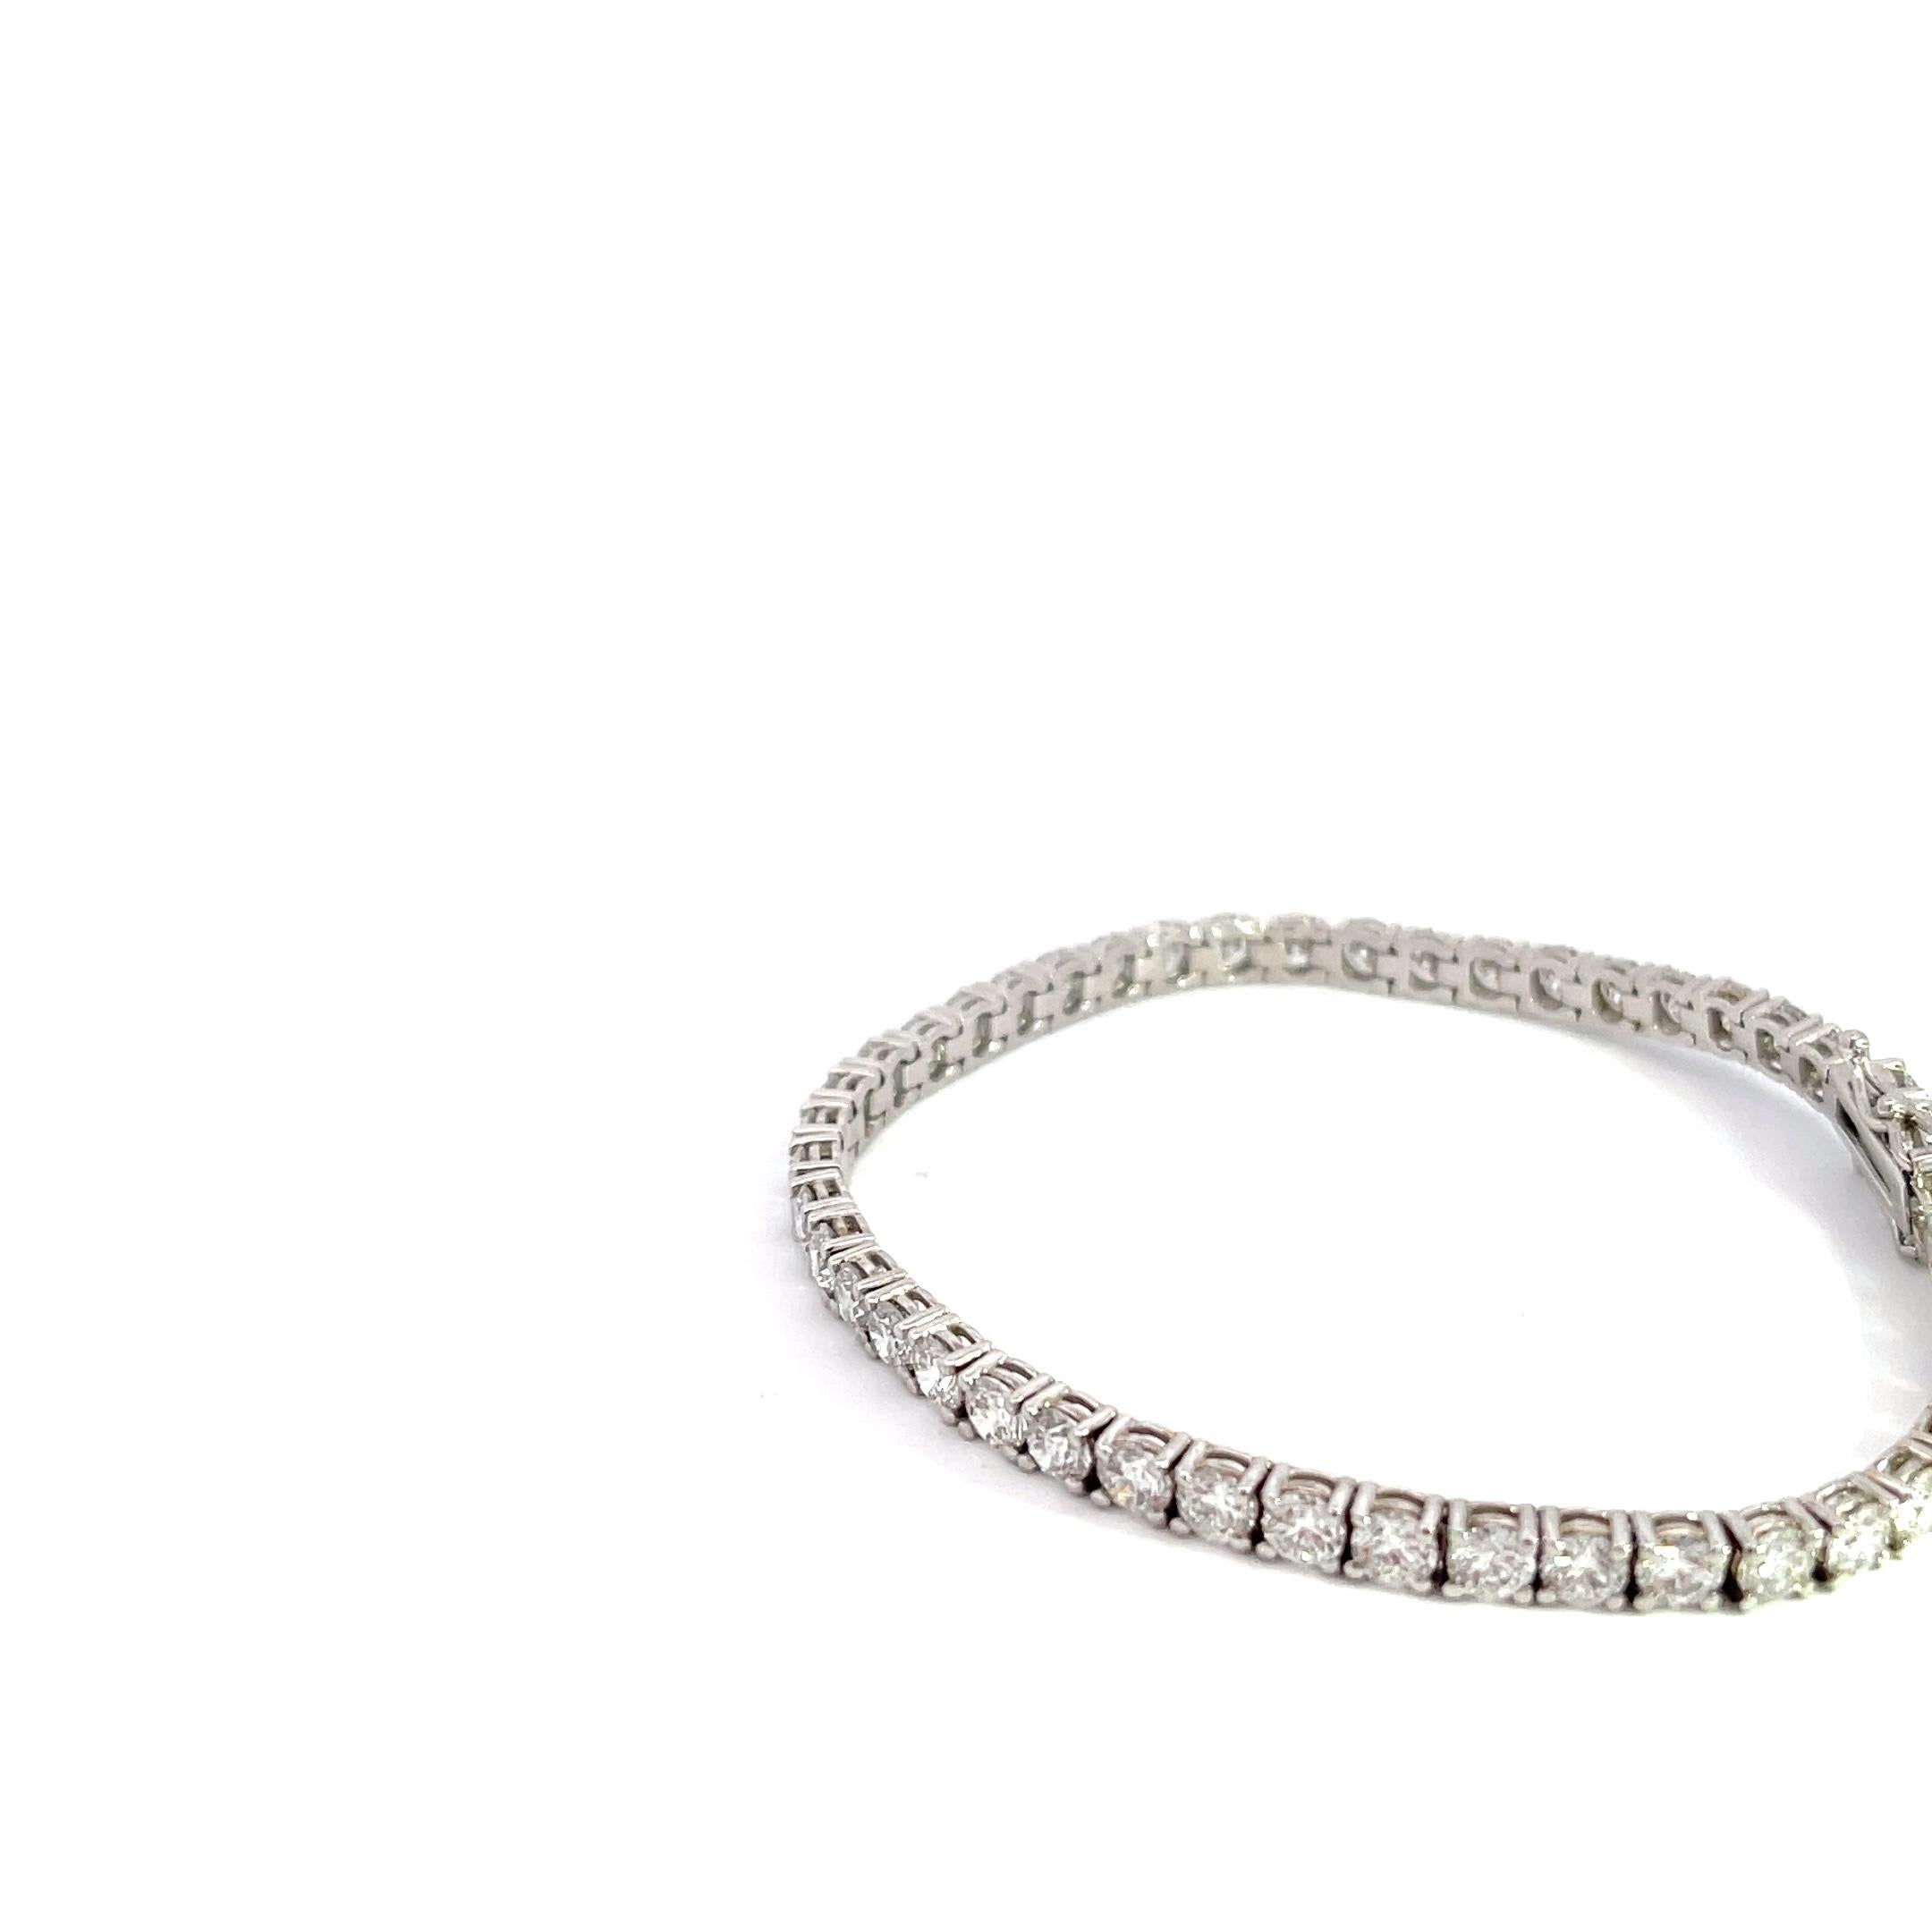 Introducing the exquisite 14k White Gold 8ctw Diamond Tennis Bracelet, a true symbol of timeless elegance and sophistication. This dazzling masterpiece is a must-have for those seeking to make a stunning statement. Crafted with meticulous attention